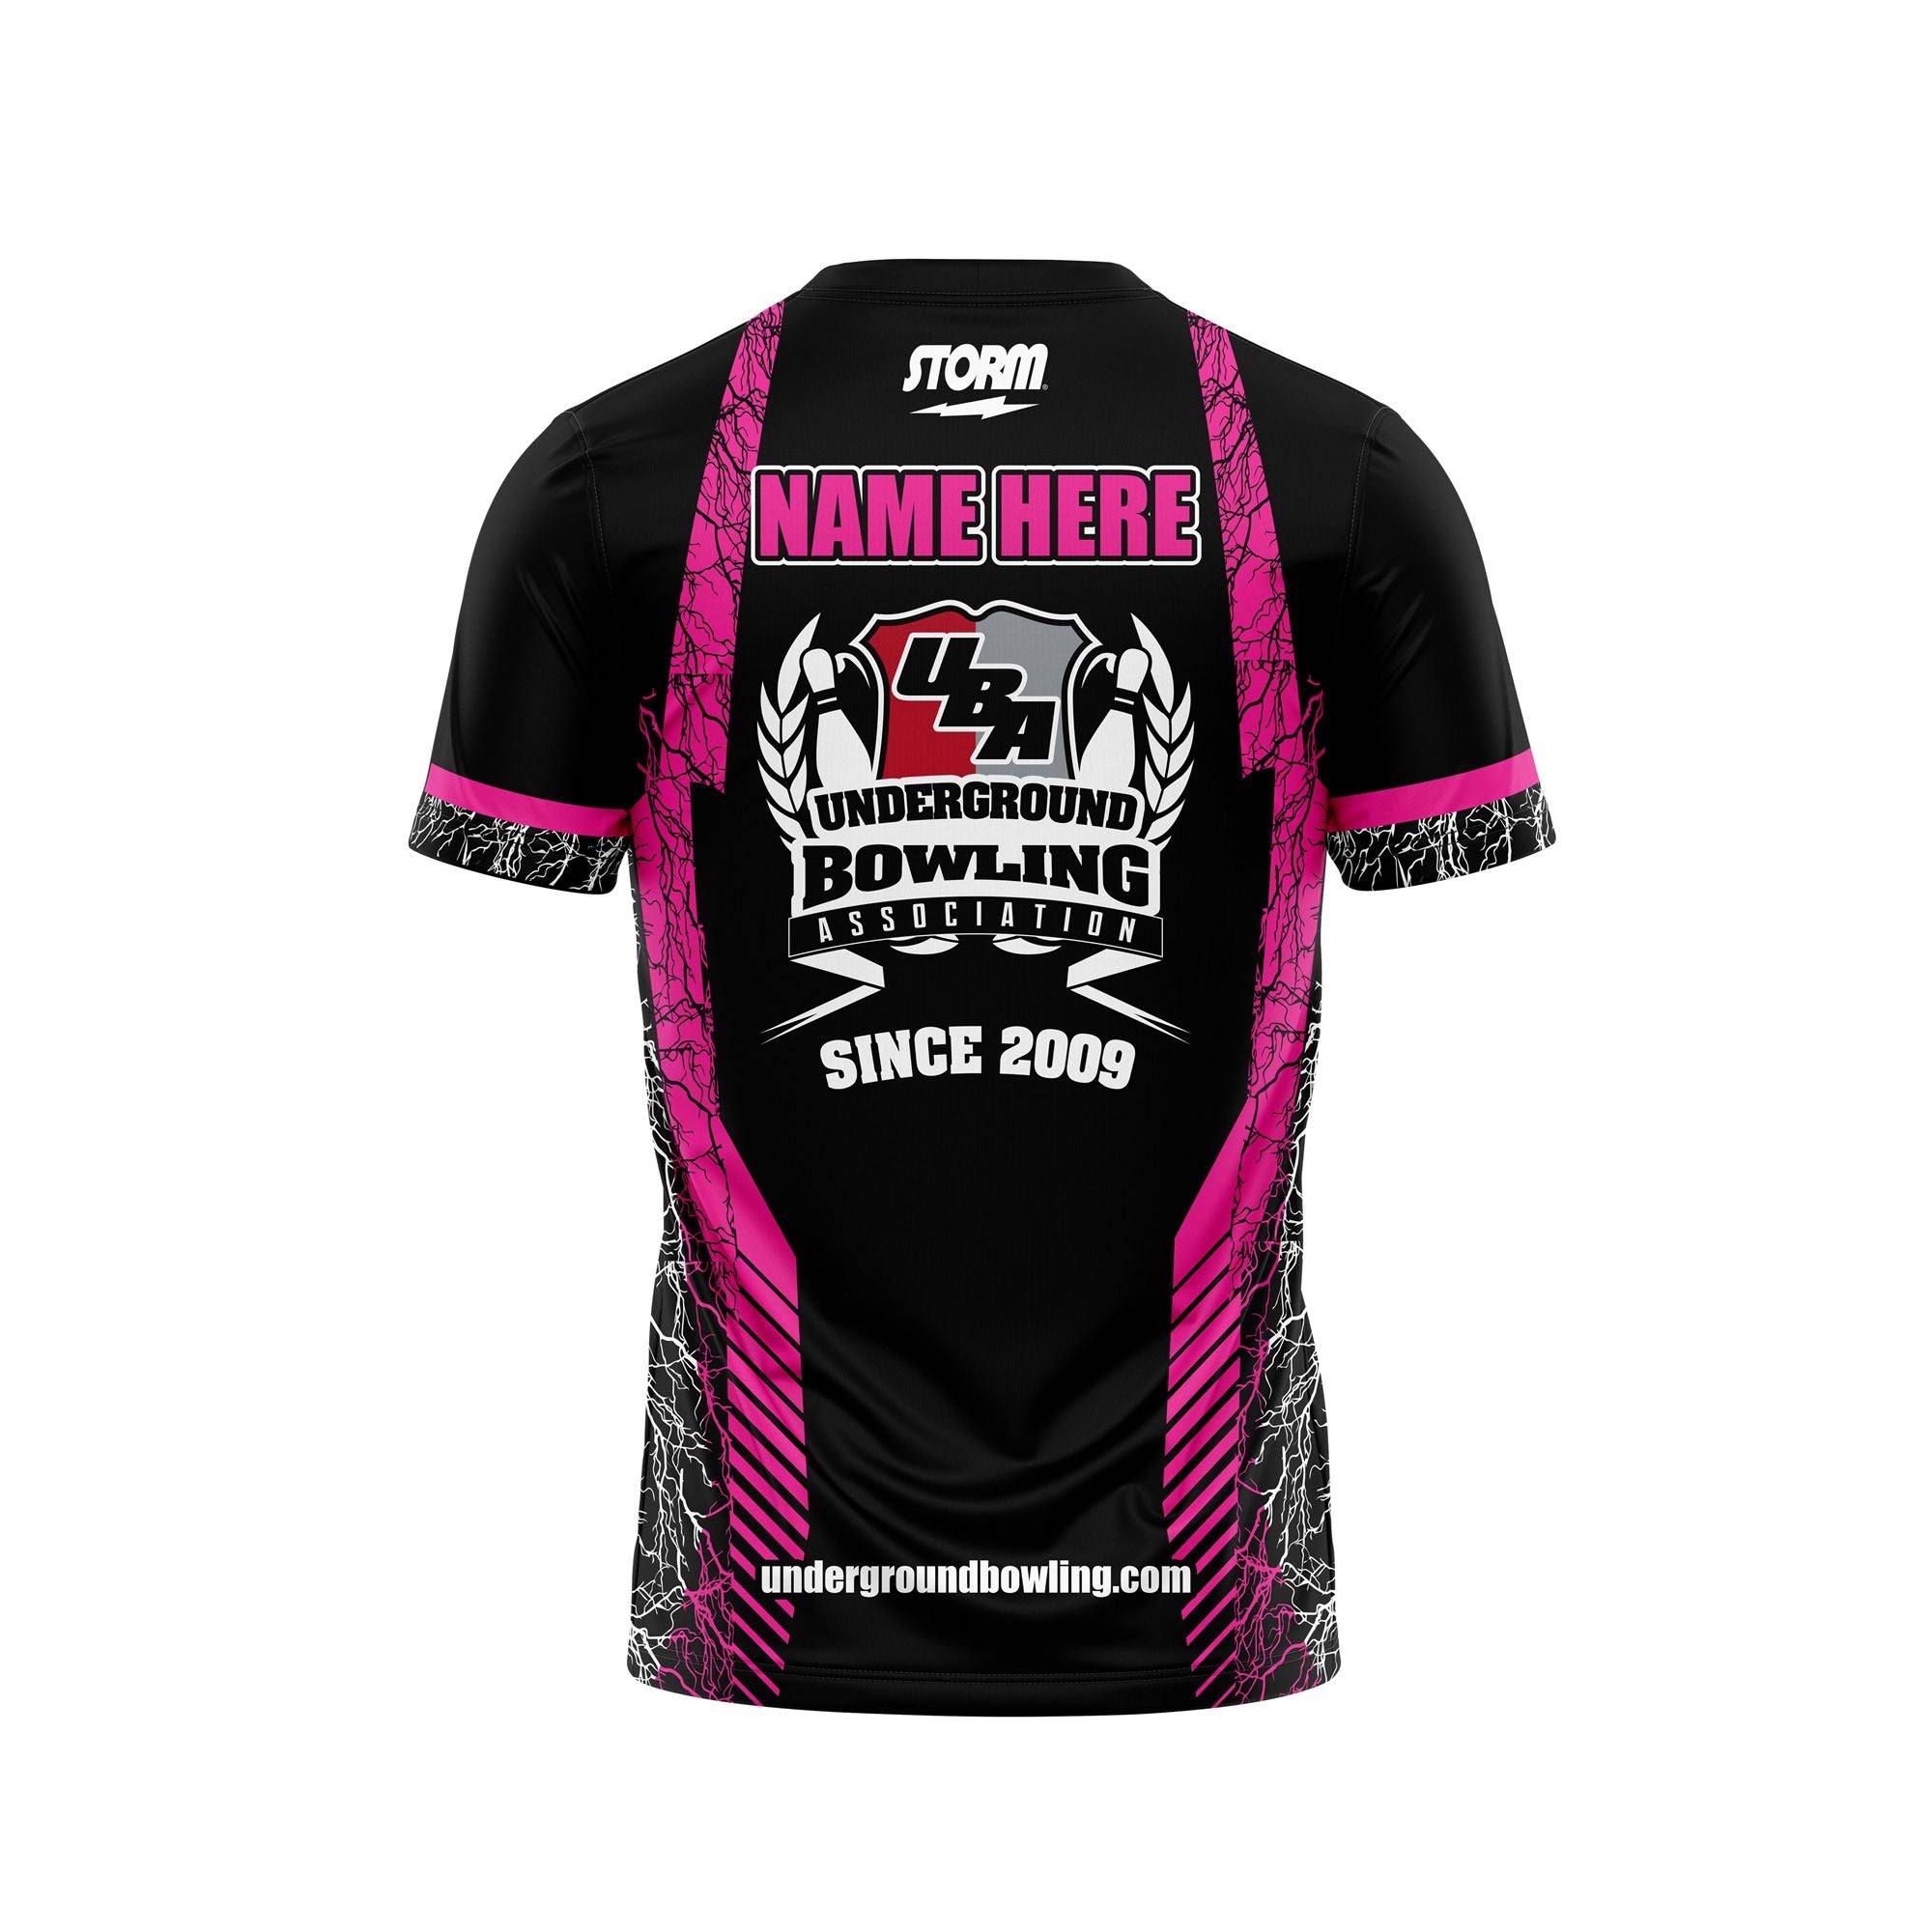 The Tribe Breast Cancer Black Jersey